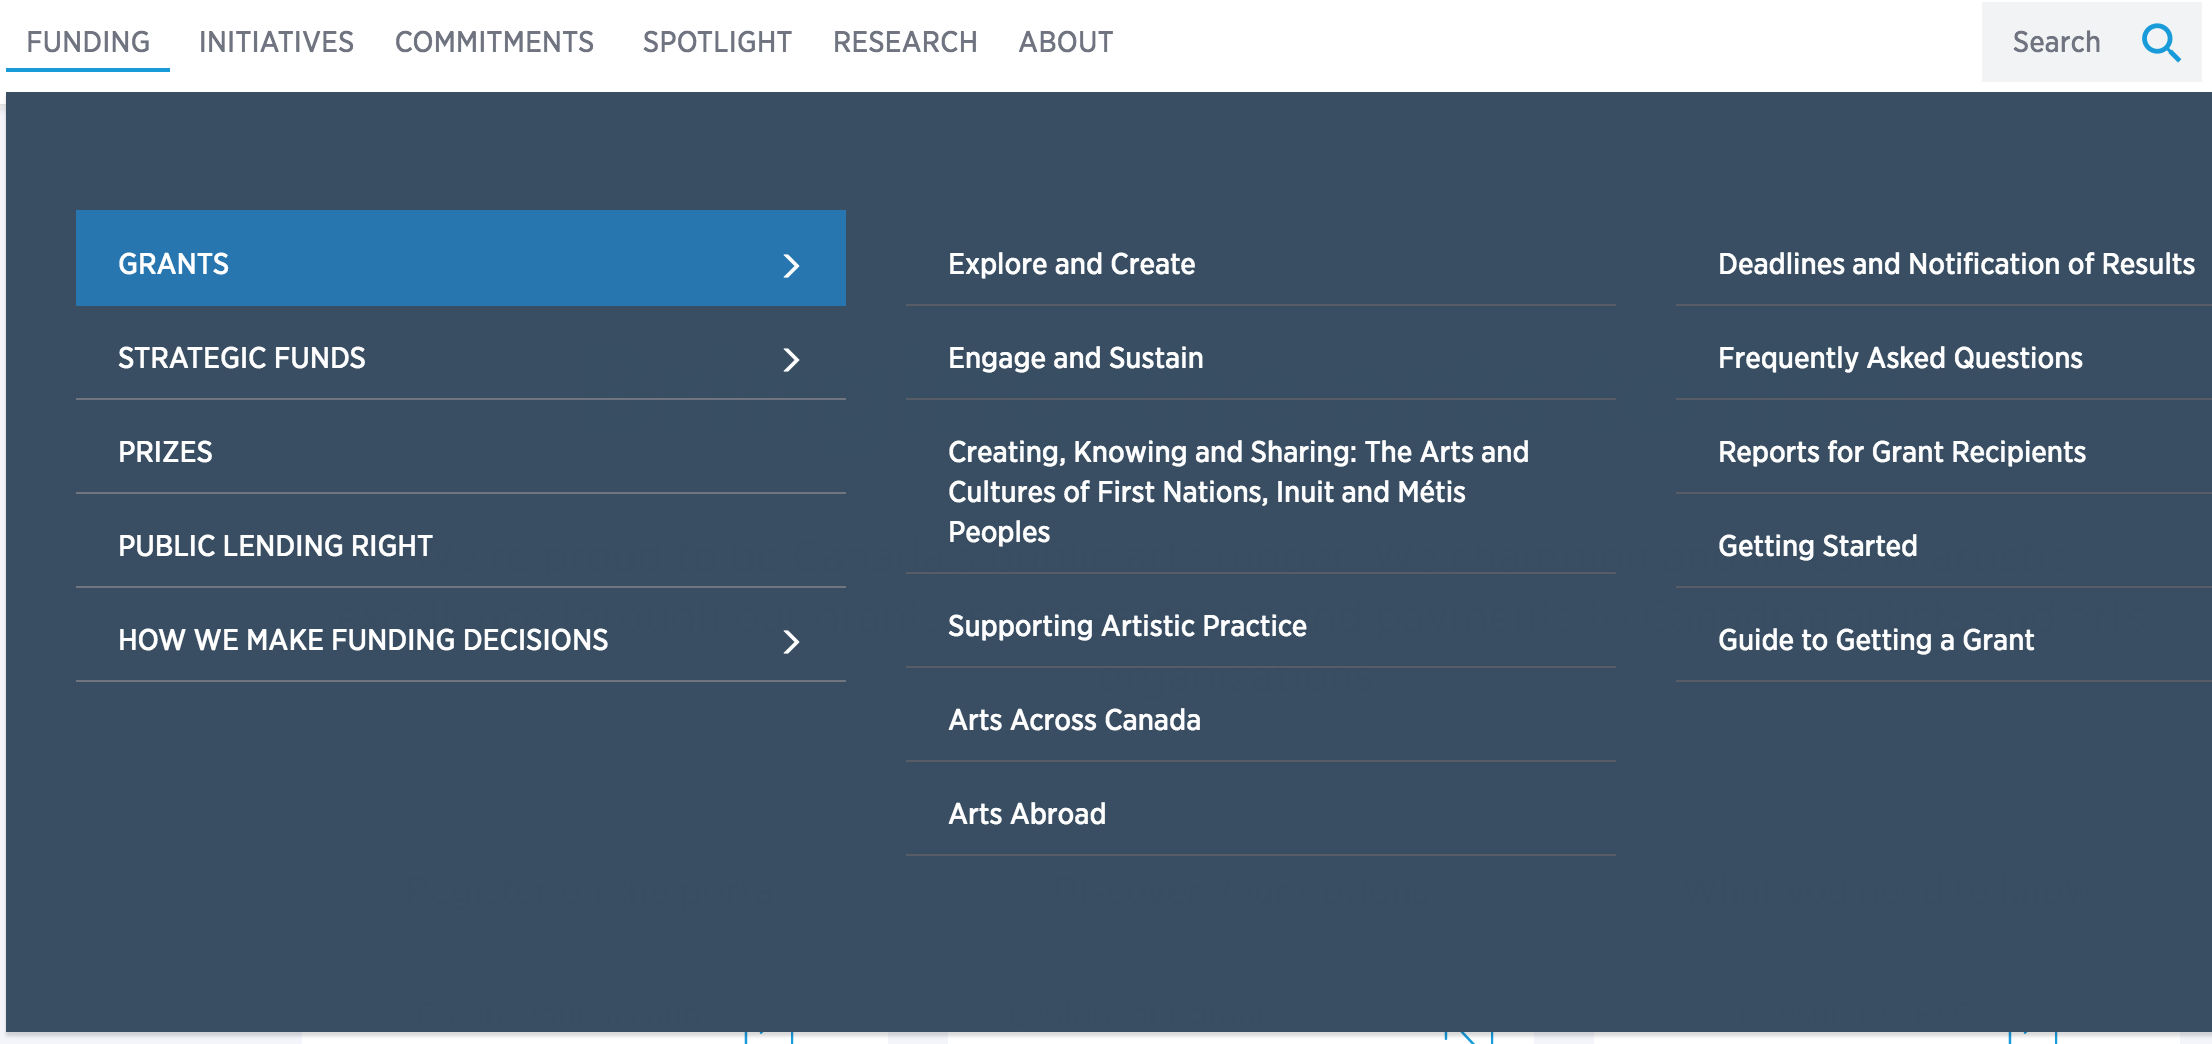 Screenshot of the canadacouncil.ca website showing the navigation menu for their grant programs. The grant menu includes links to each of their funding programs which only have somewhat-descriptive names, such as Engage and Sustain. There is also a second column for general information about grants.